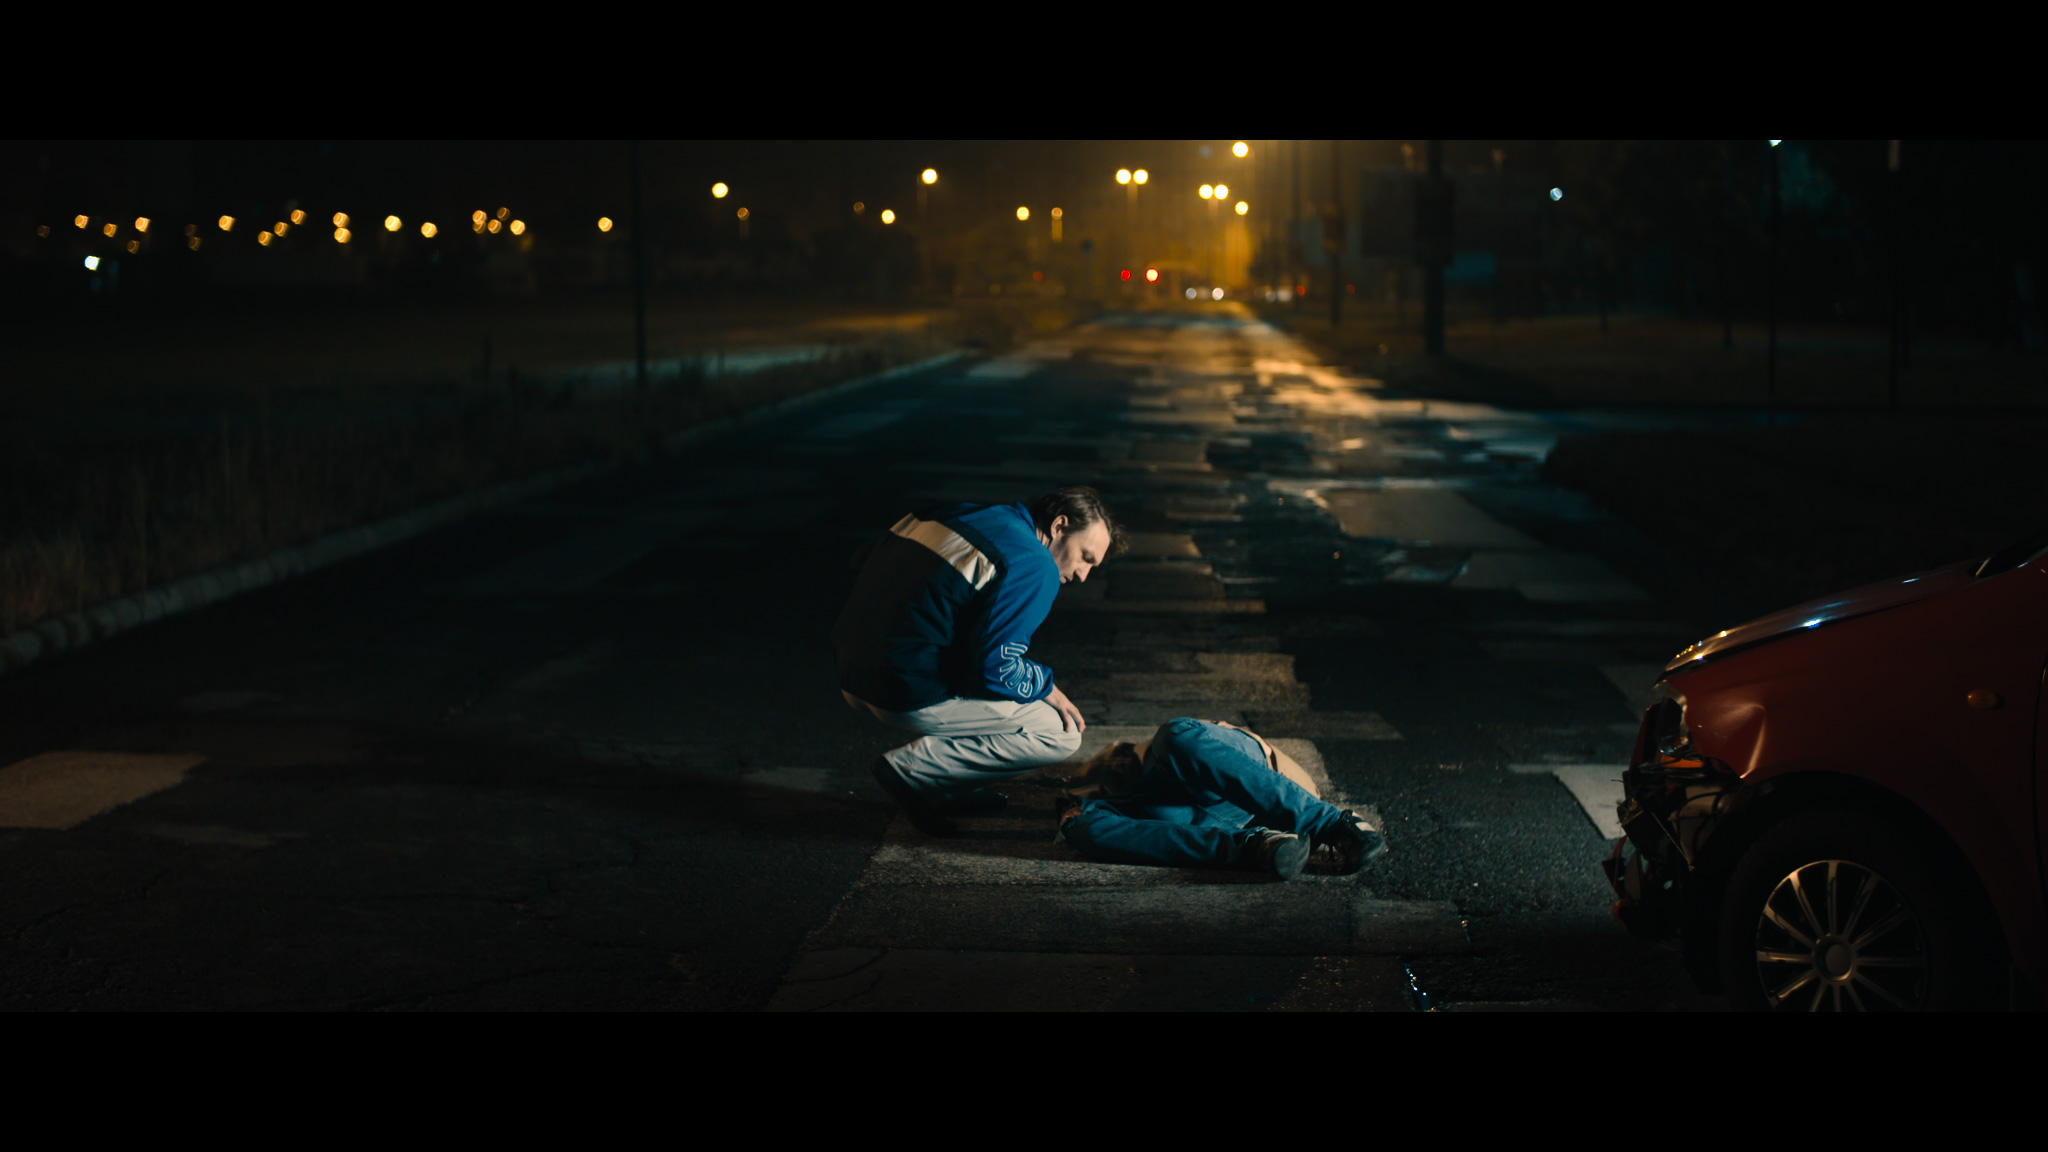 eszter galambos, Still from the movie Accident. Director: Bohdan Herkaliuk, Director of photography: Eszter Galambos, cast: Orbán Levente, colorist: Anna Stalte